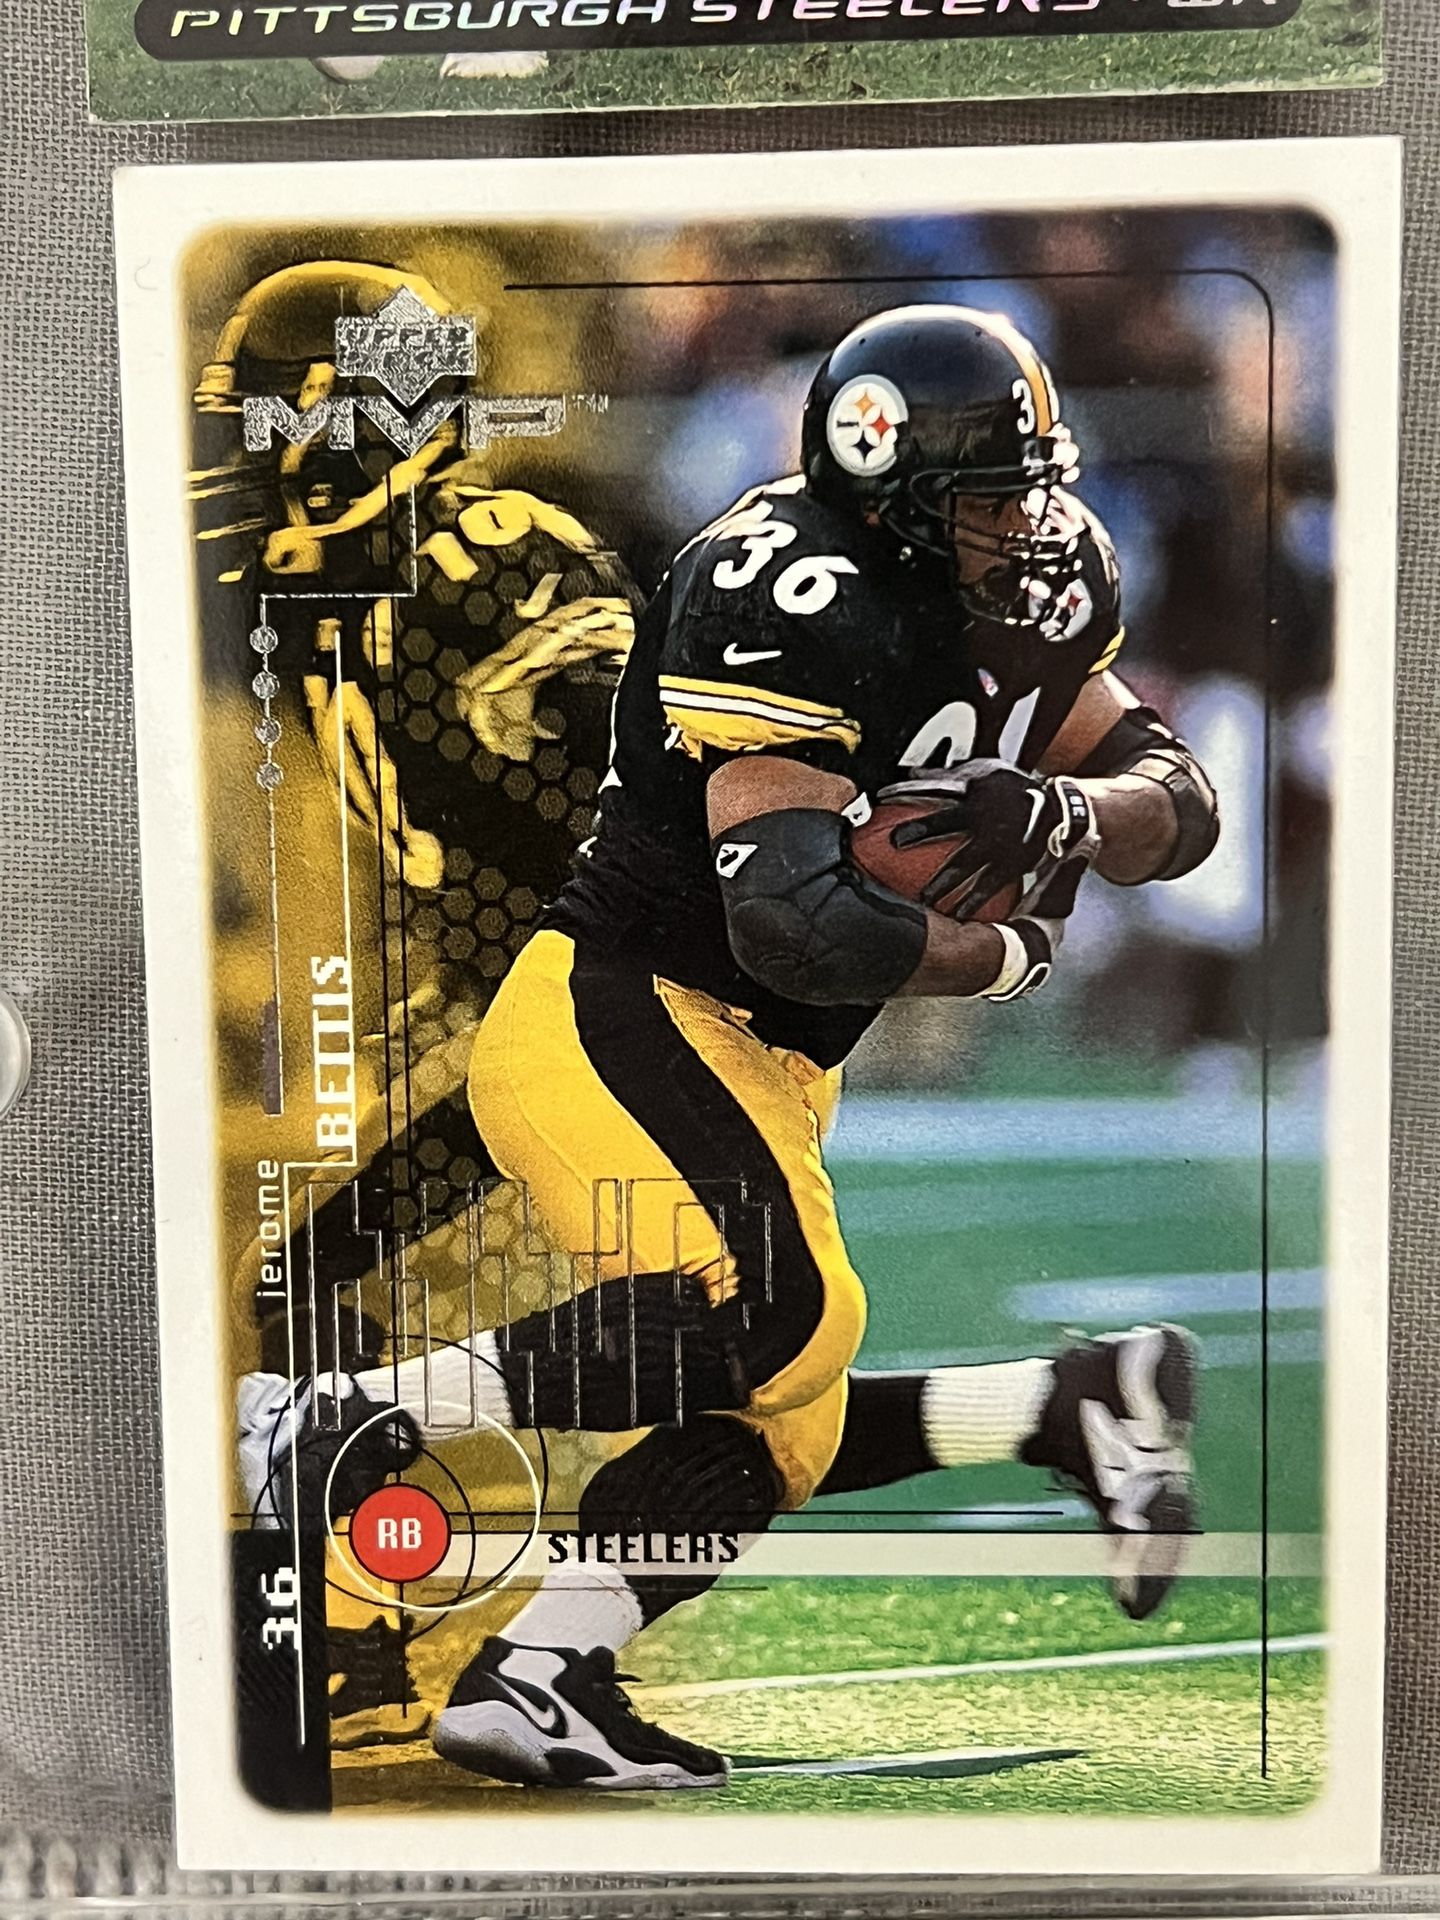 Vintage Collectible Pittsburgh Steelers Hines Ward (2) Jerome Bettis Late 1990’s Topps Trading Cards FRAMED RARE MINT CONDITION 